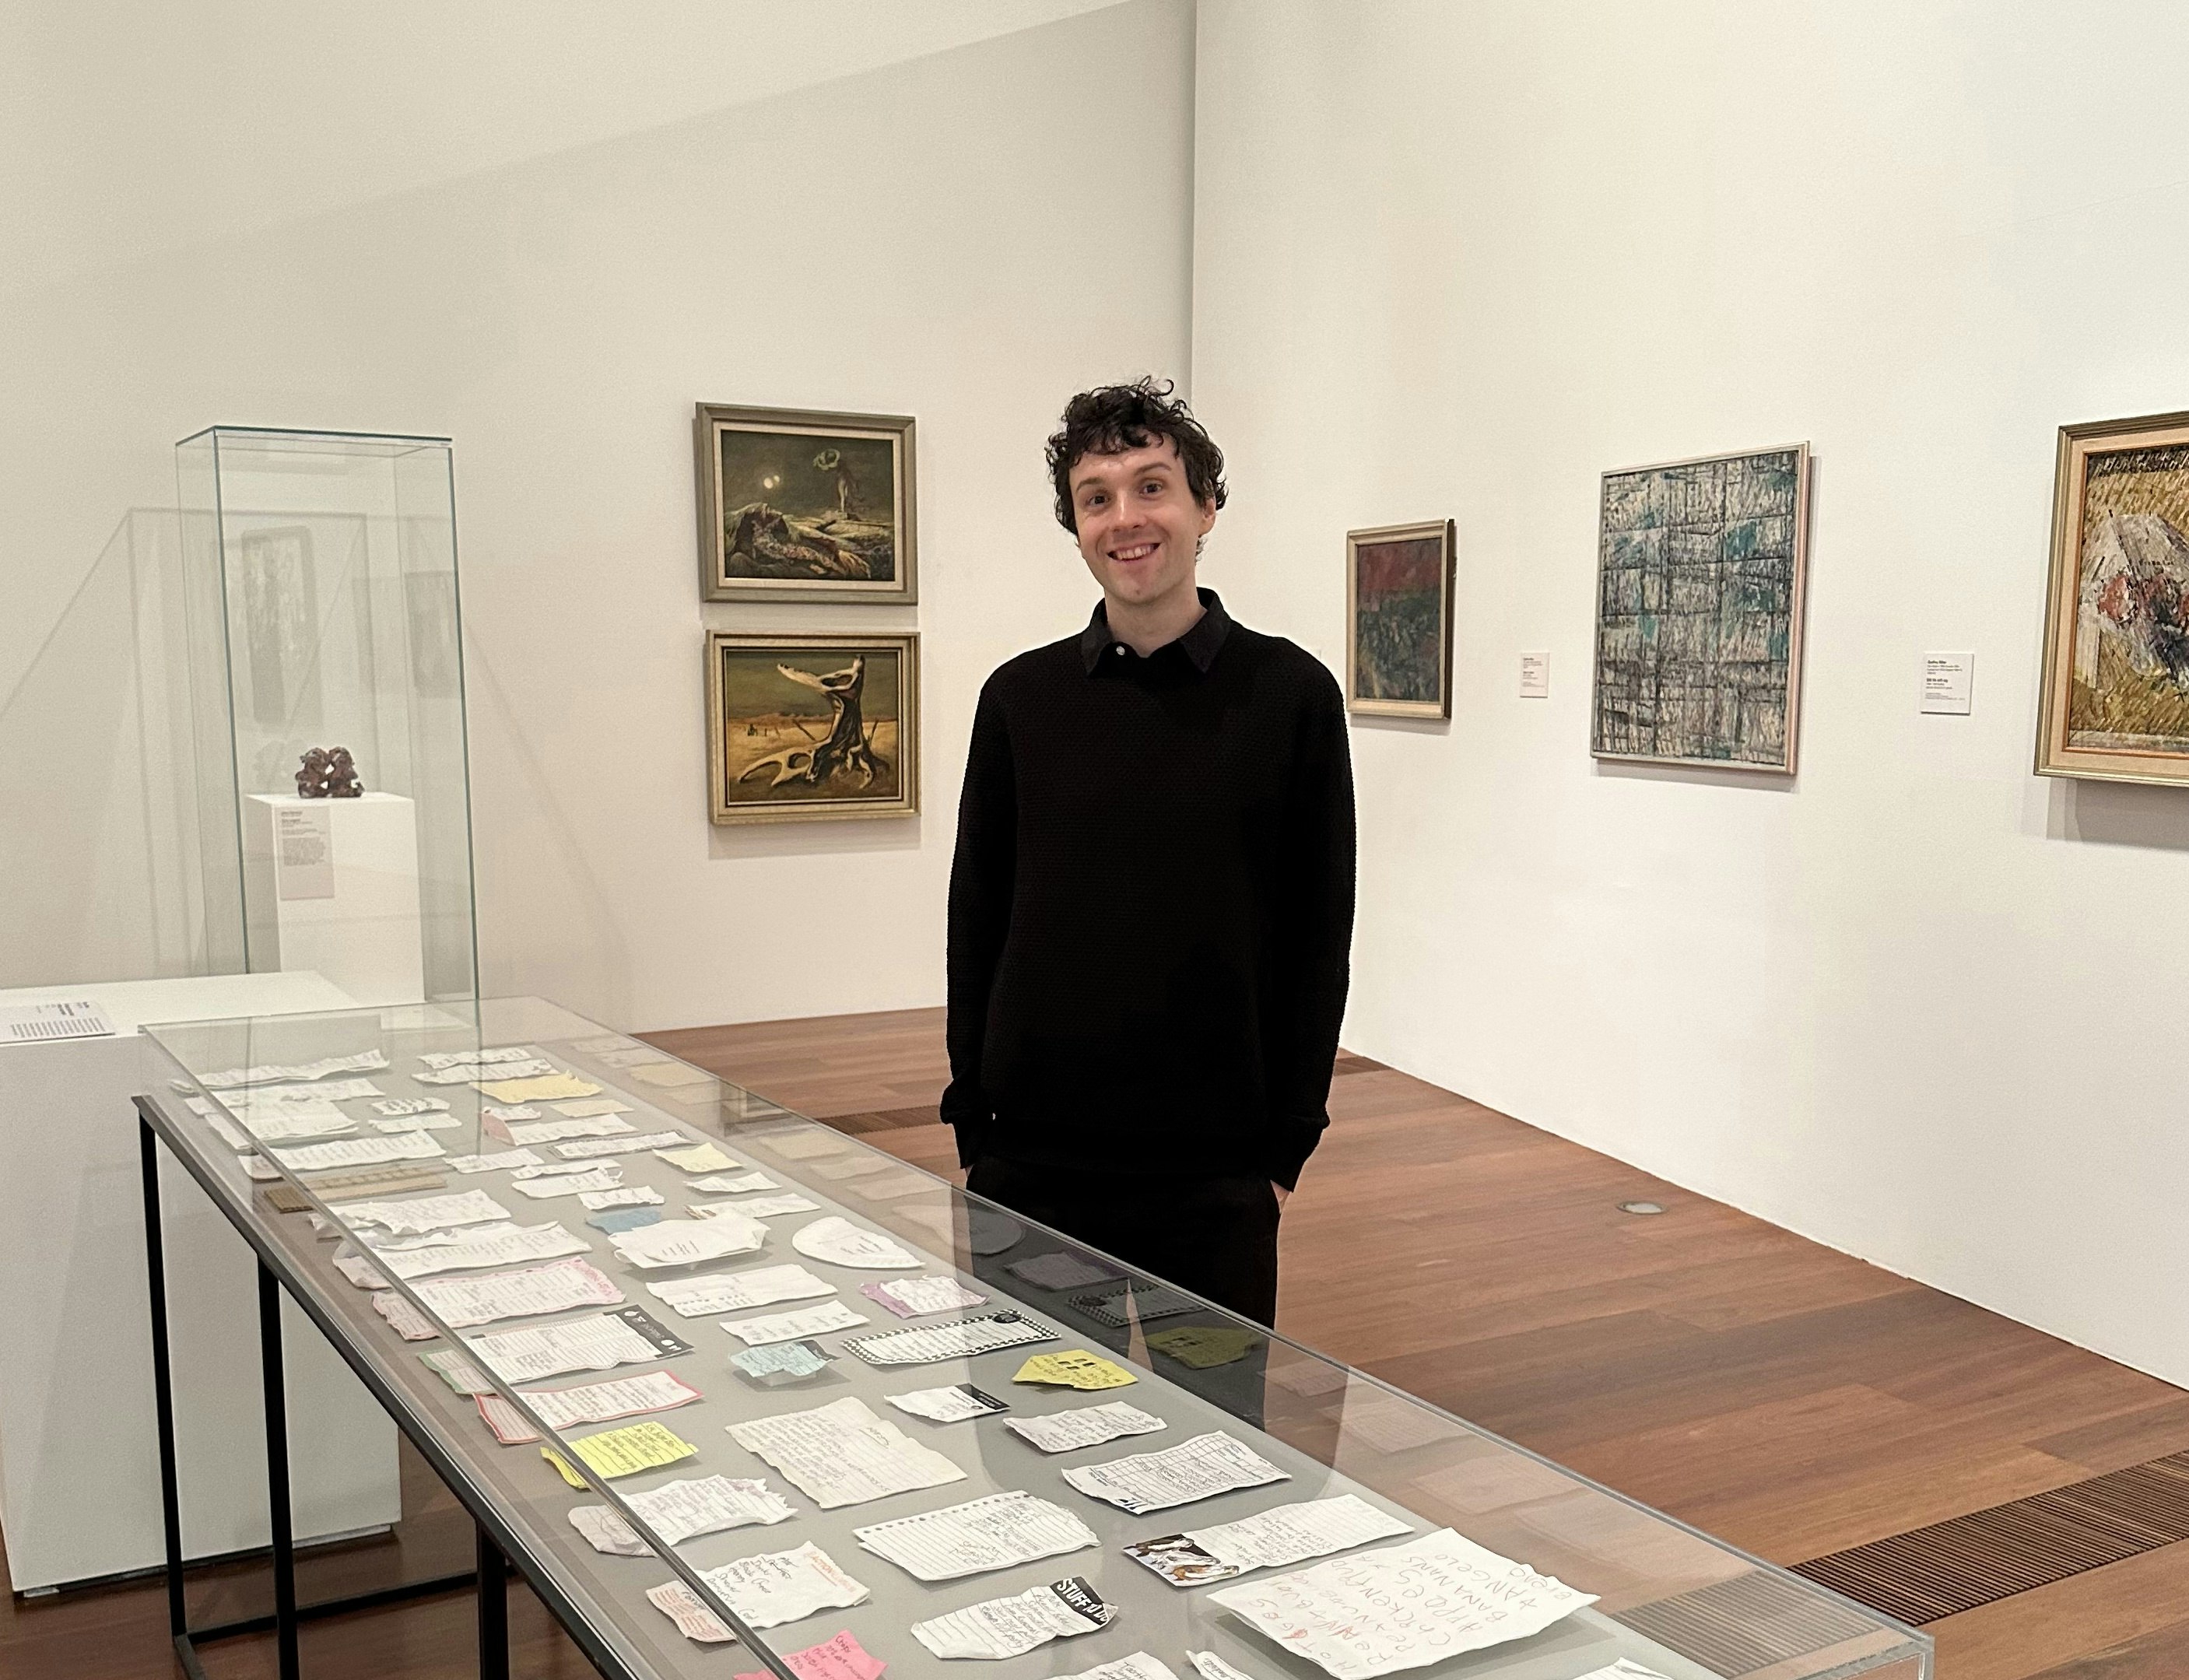 Kenny Pittock, dressed in black, stands behind a glass display cabinet with a series of ceramic white lists. There is artwork hung on the exhibition walls behind him.